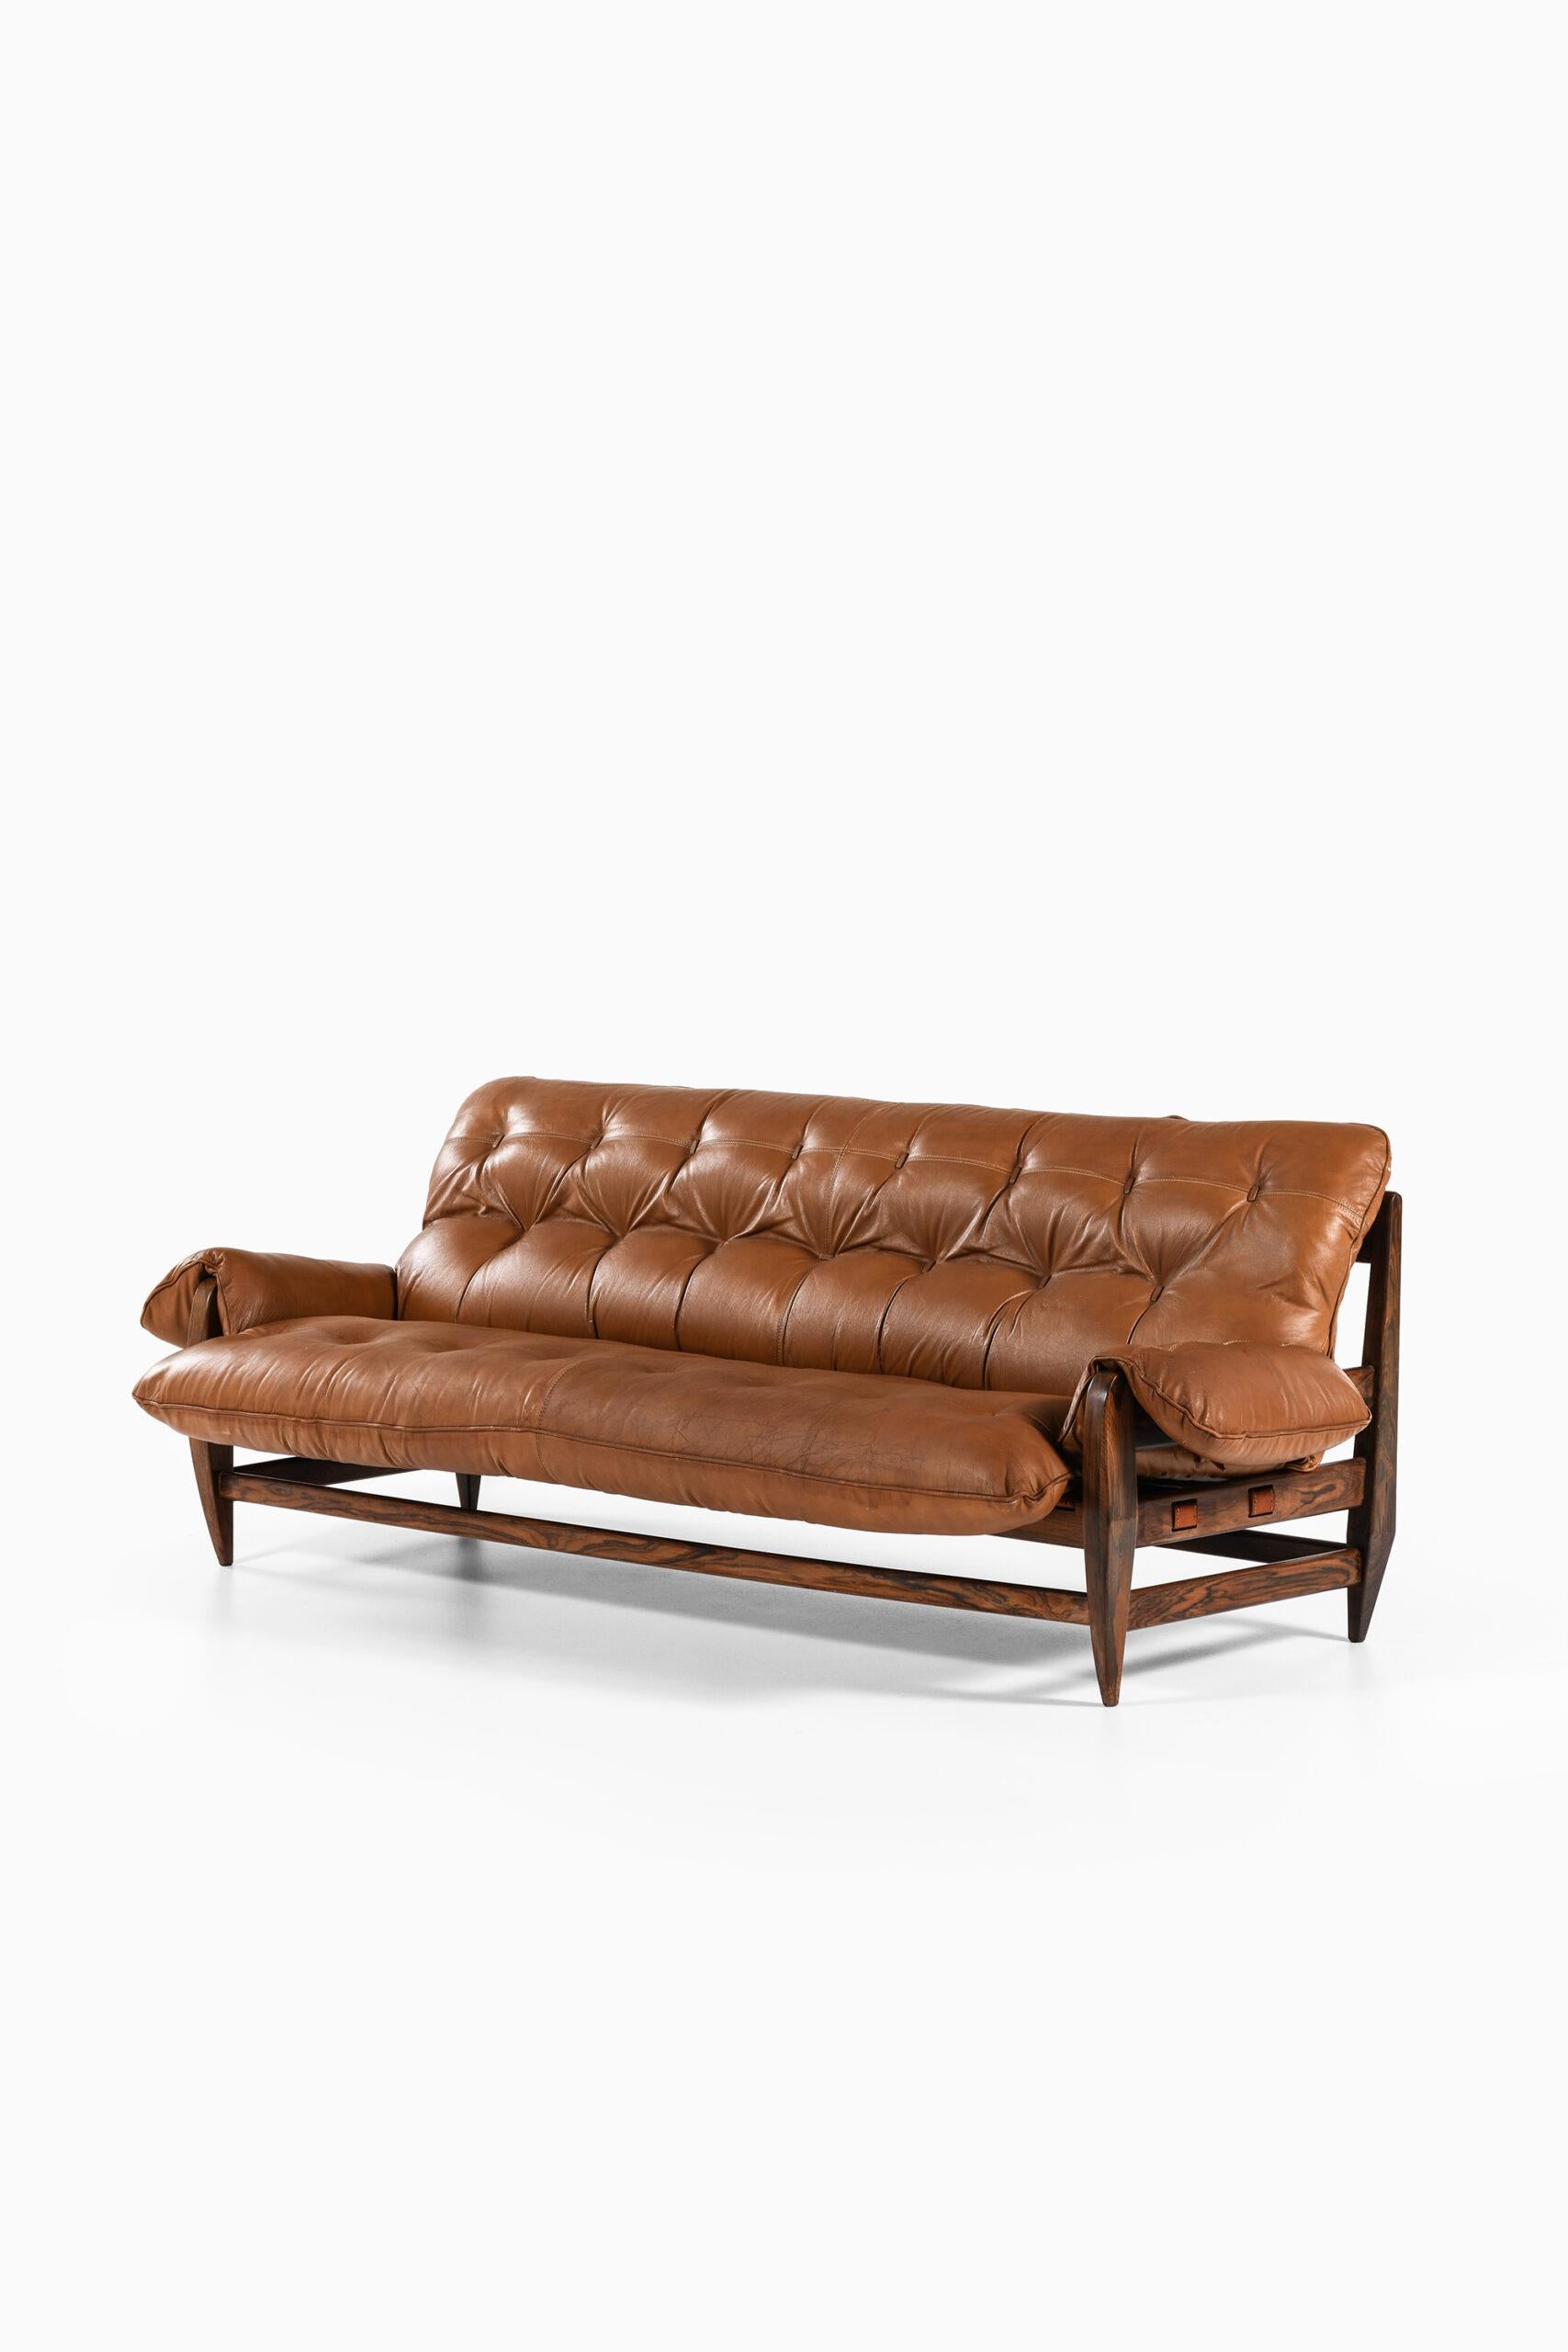 Rare sofa designed by Jean Gillon. Produced by Wood Art in Brazil.
   